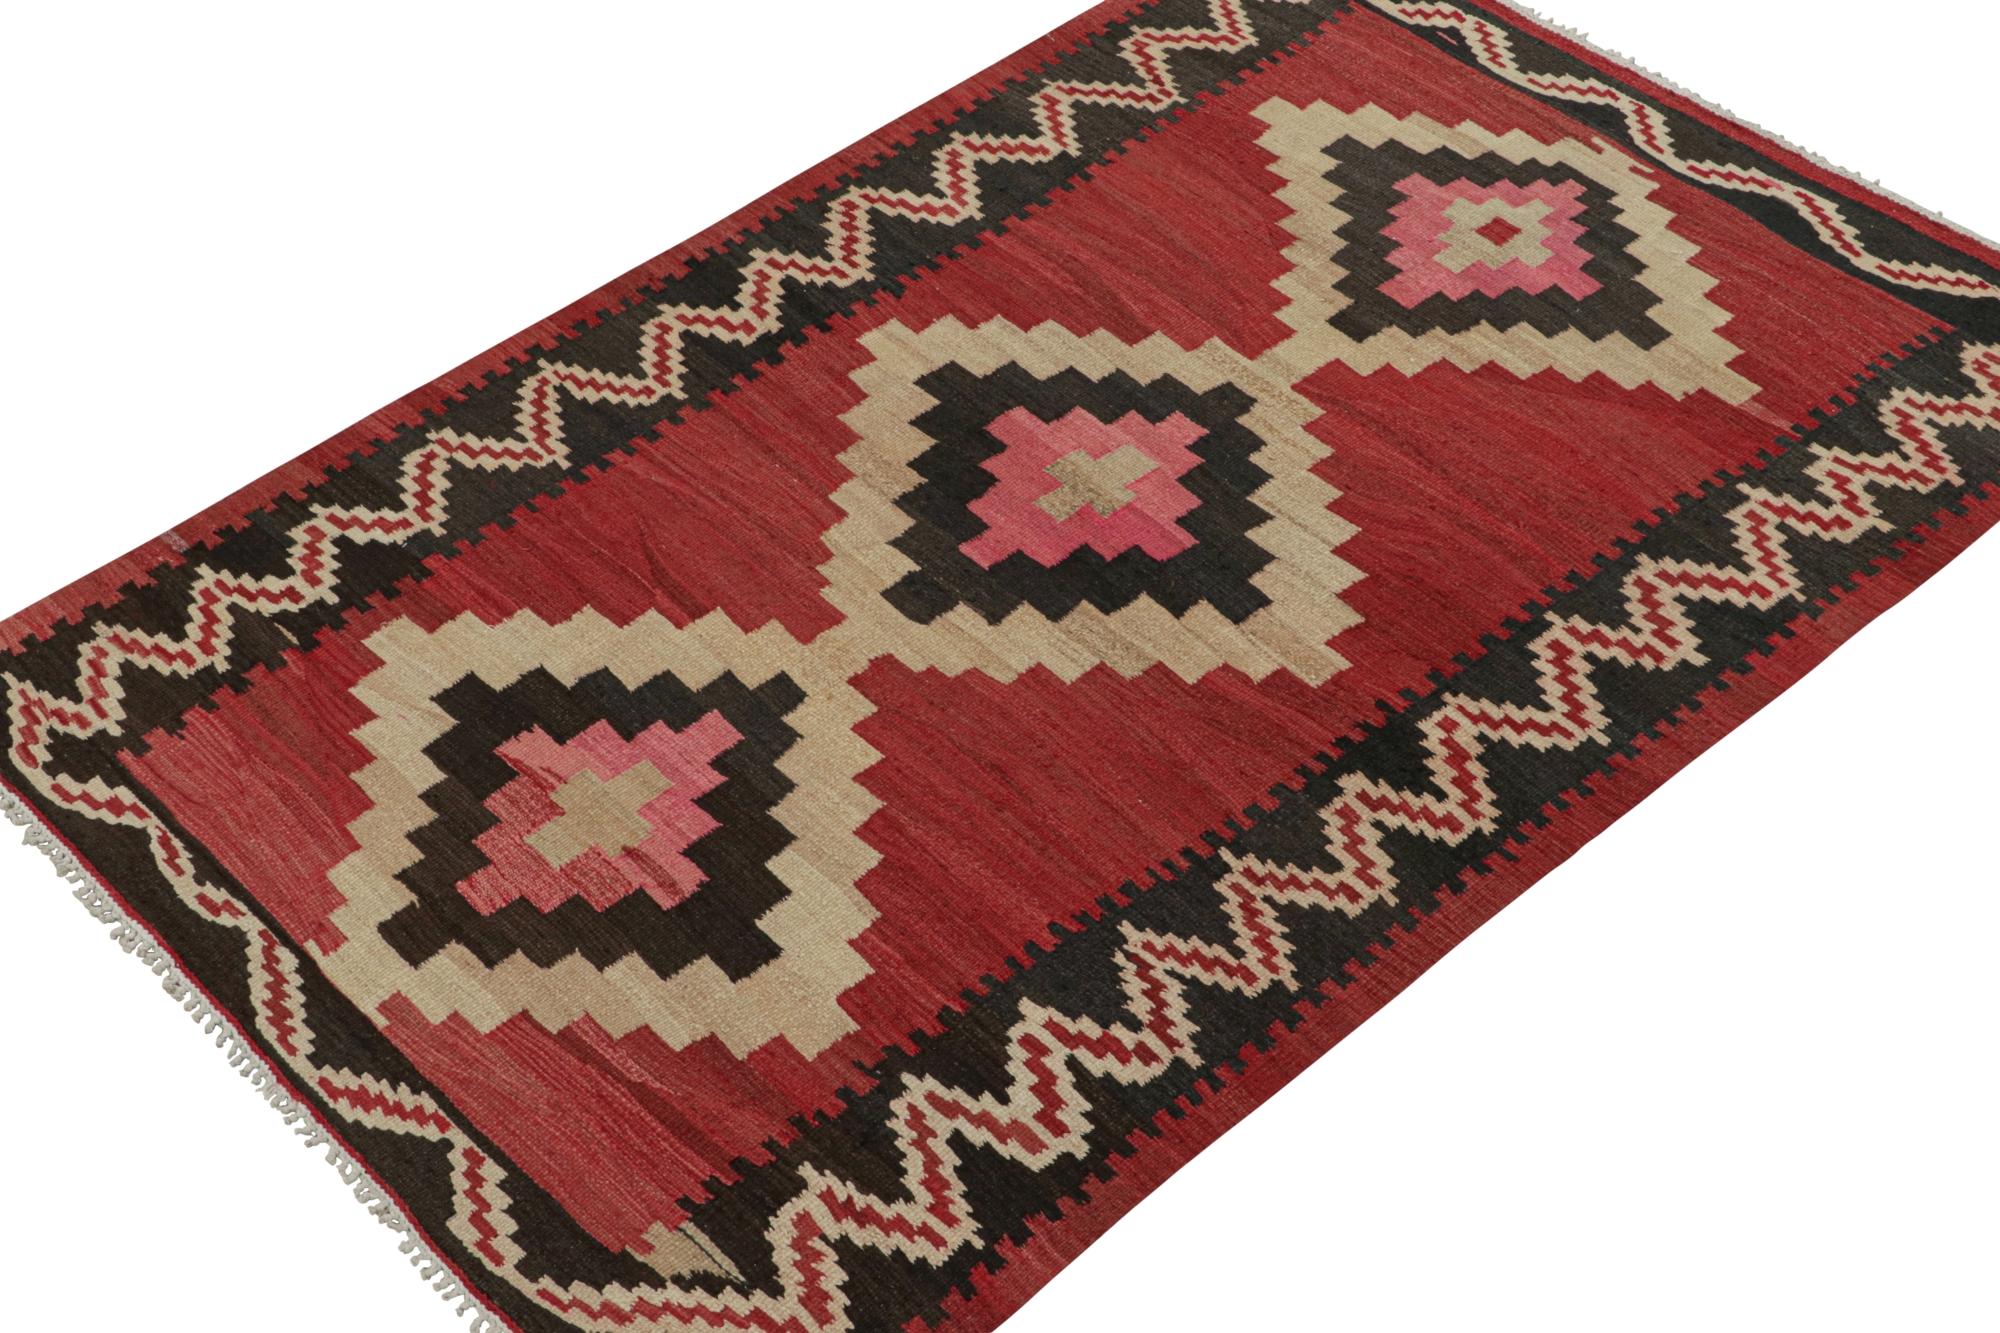 Hand-Knotted Vintage Shahsavan Persian Kilim in Red, Beige & Black Patterns by Rug & Kilim For Sale